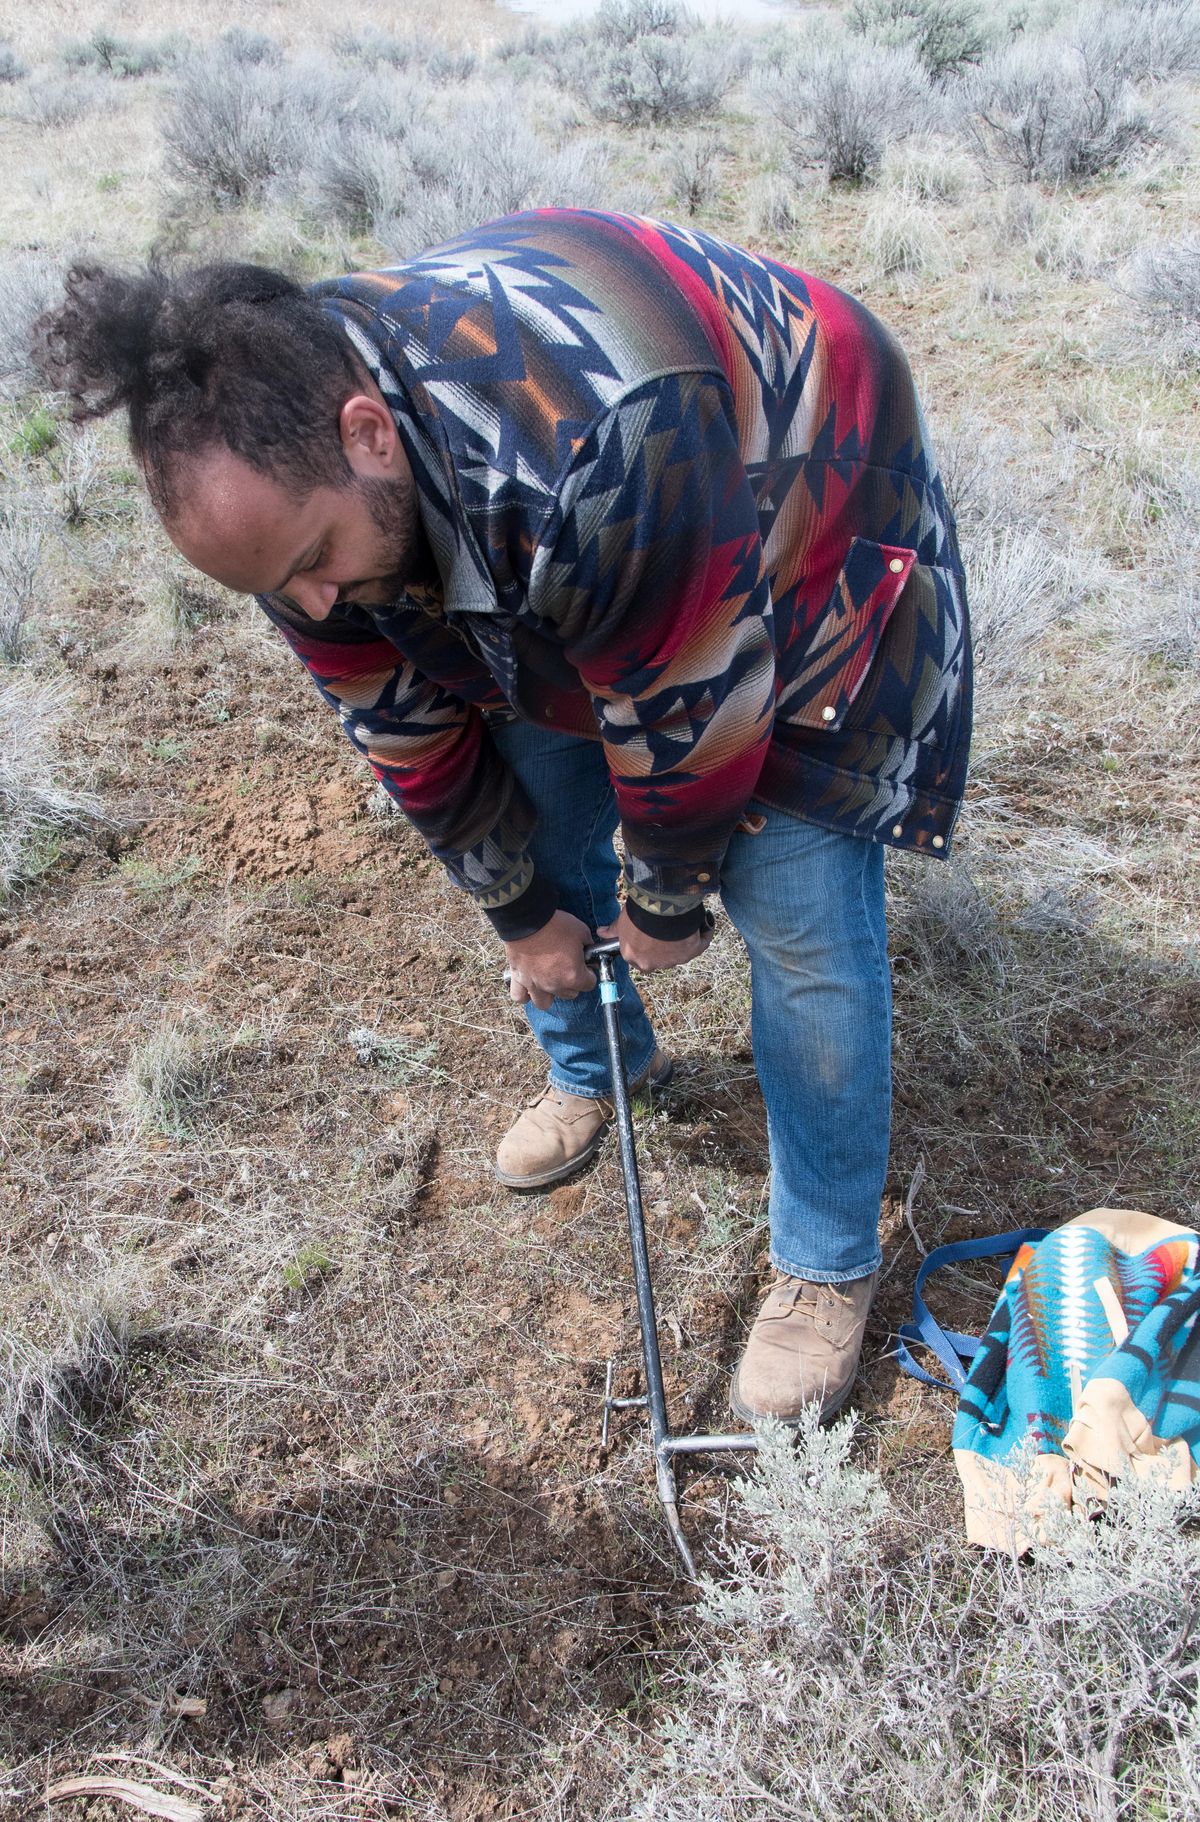 Anthony McKinsey digs for roots near Swanson Lakes east of Spokane on April 22. (Eli Francovich / The Spokesman-Review)